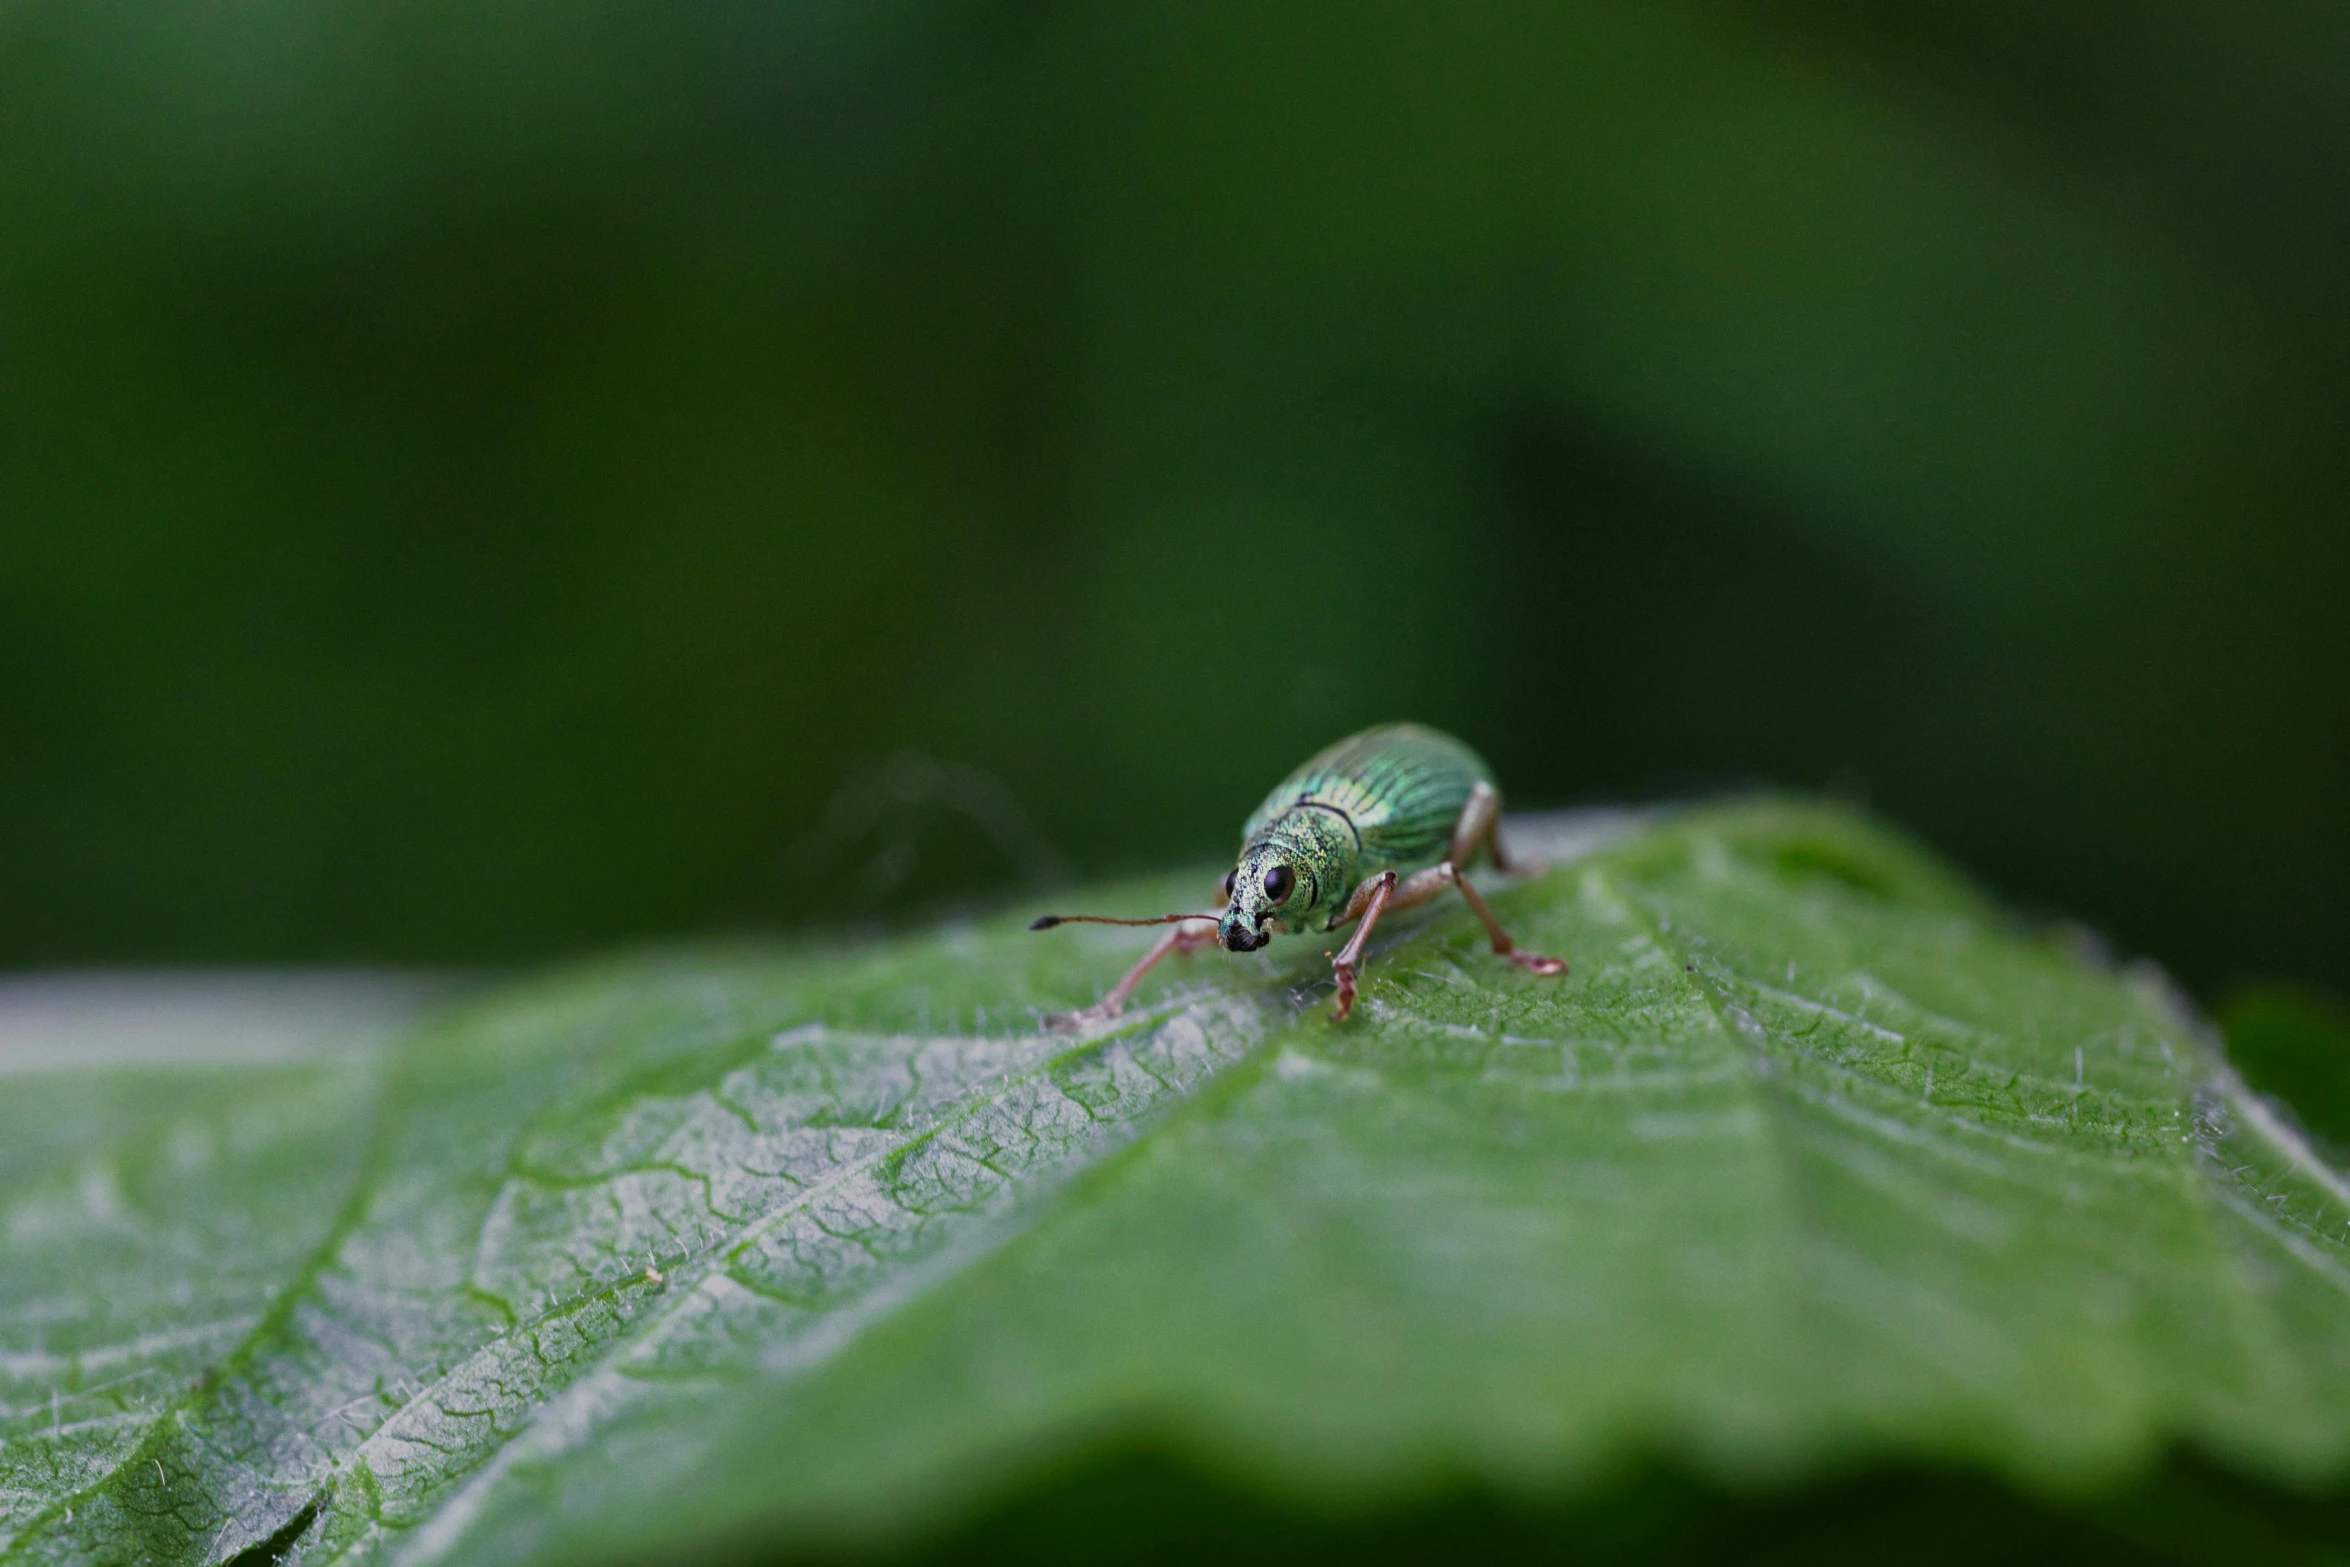 a bug sits on a green leaf and appears to be insect prey